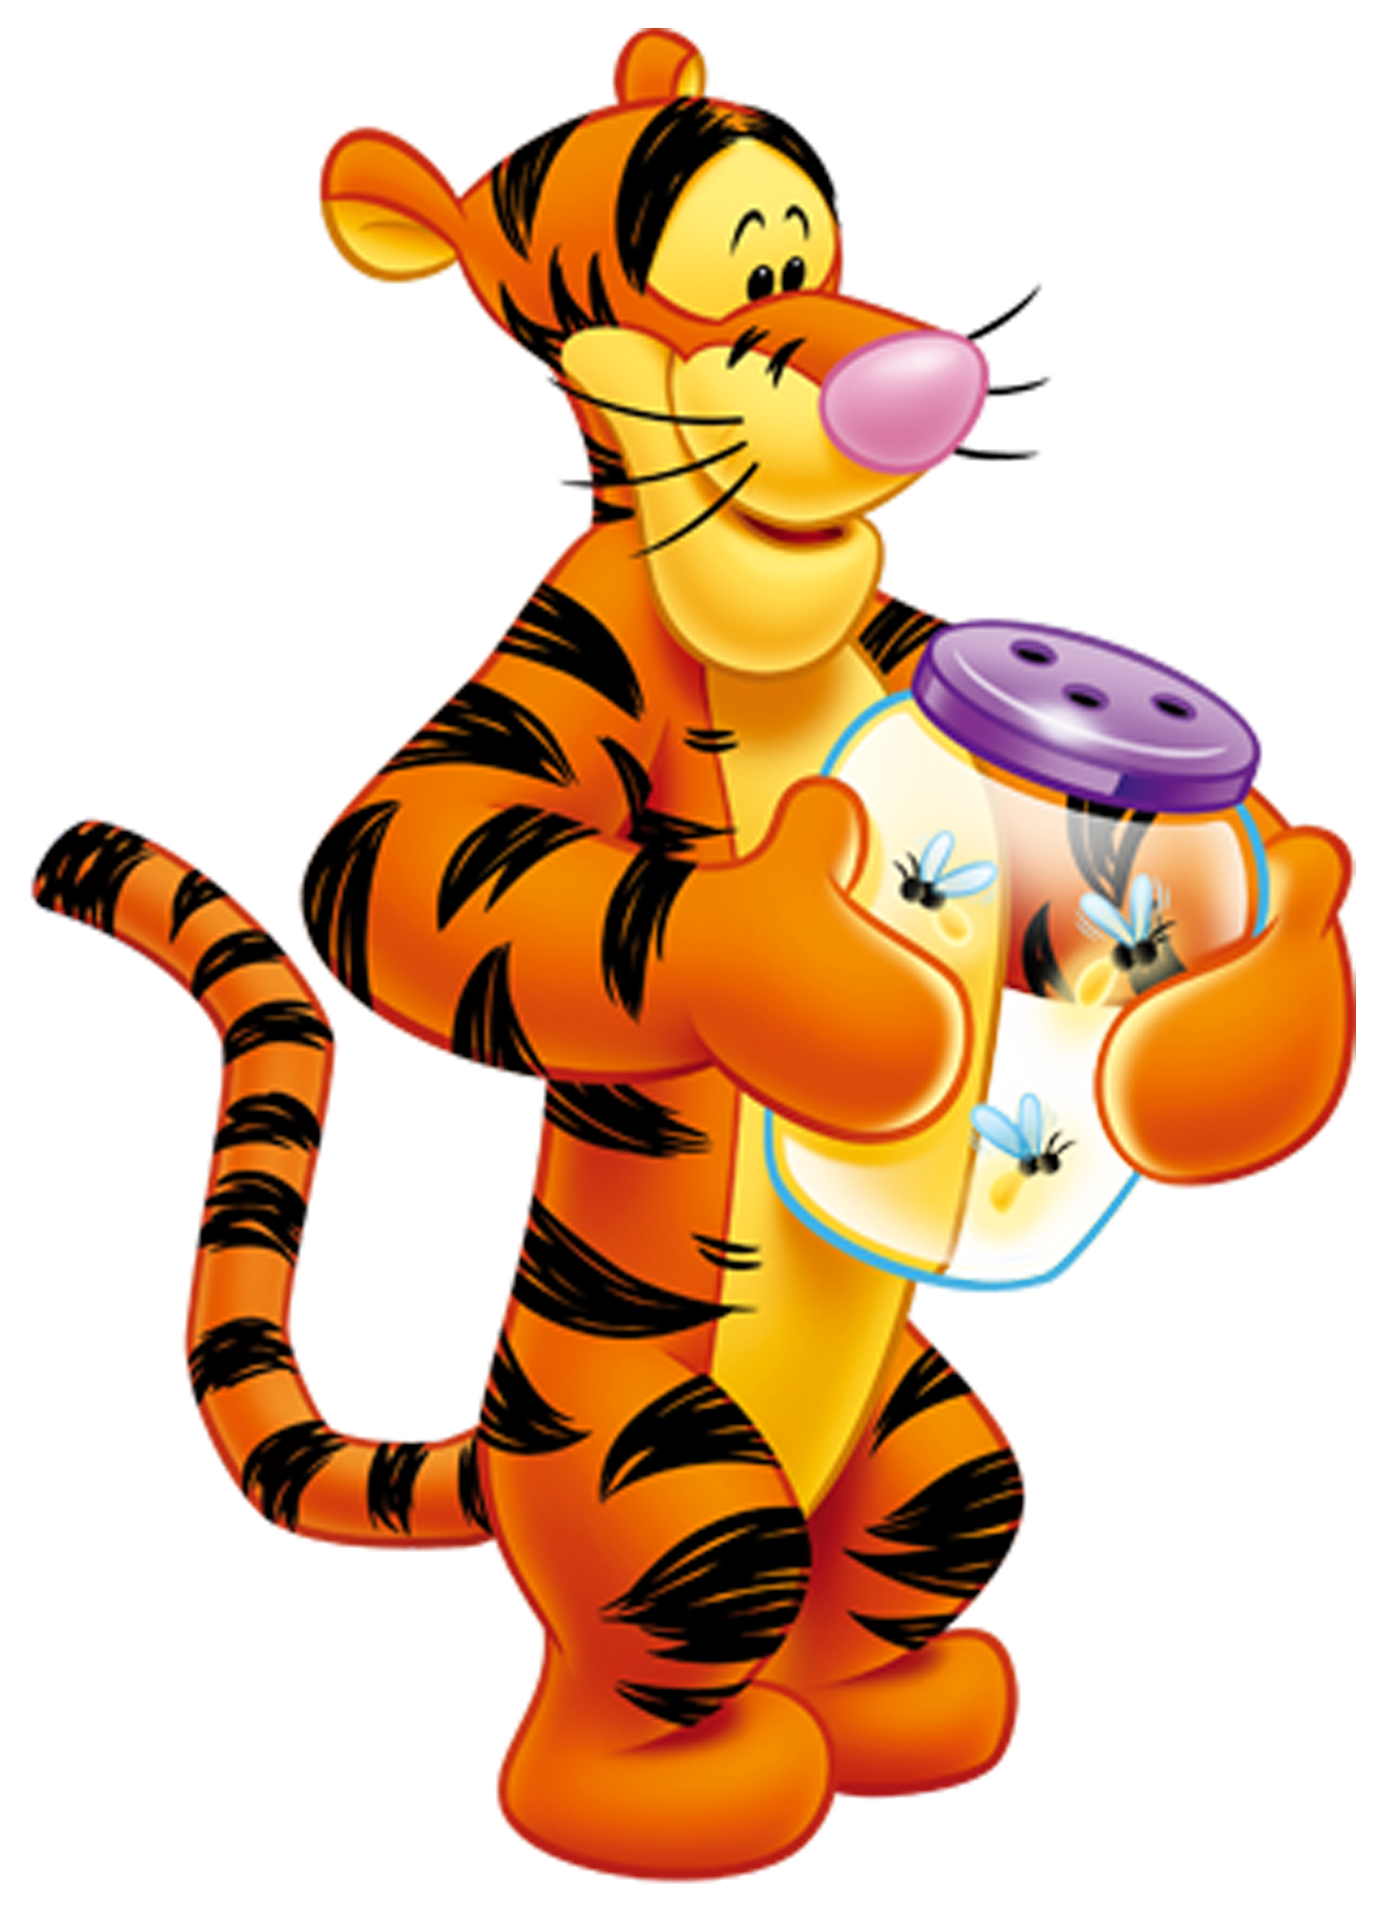 Winnie the pooh PNG Image